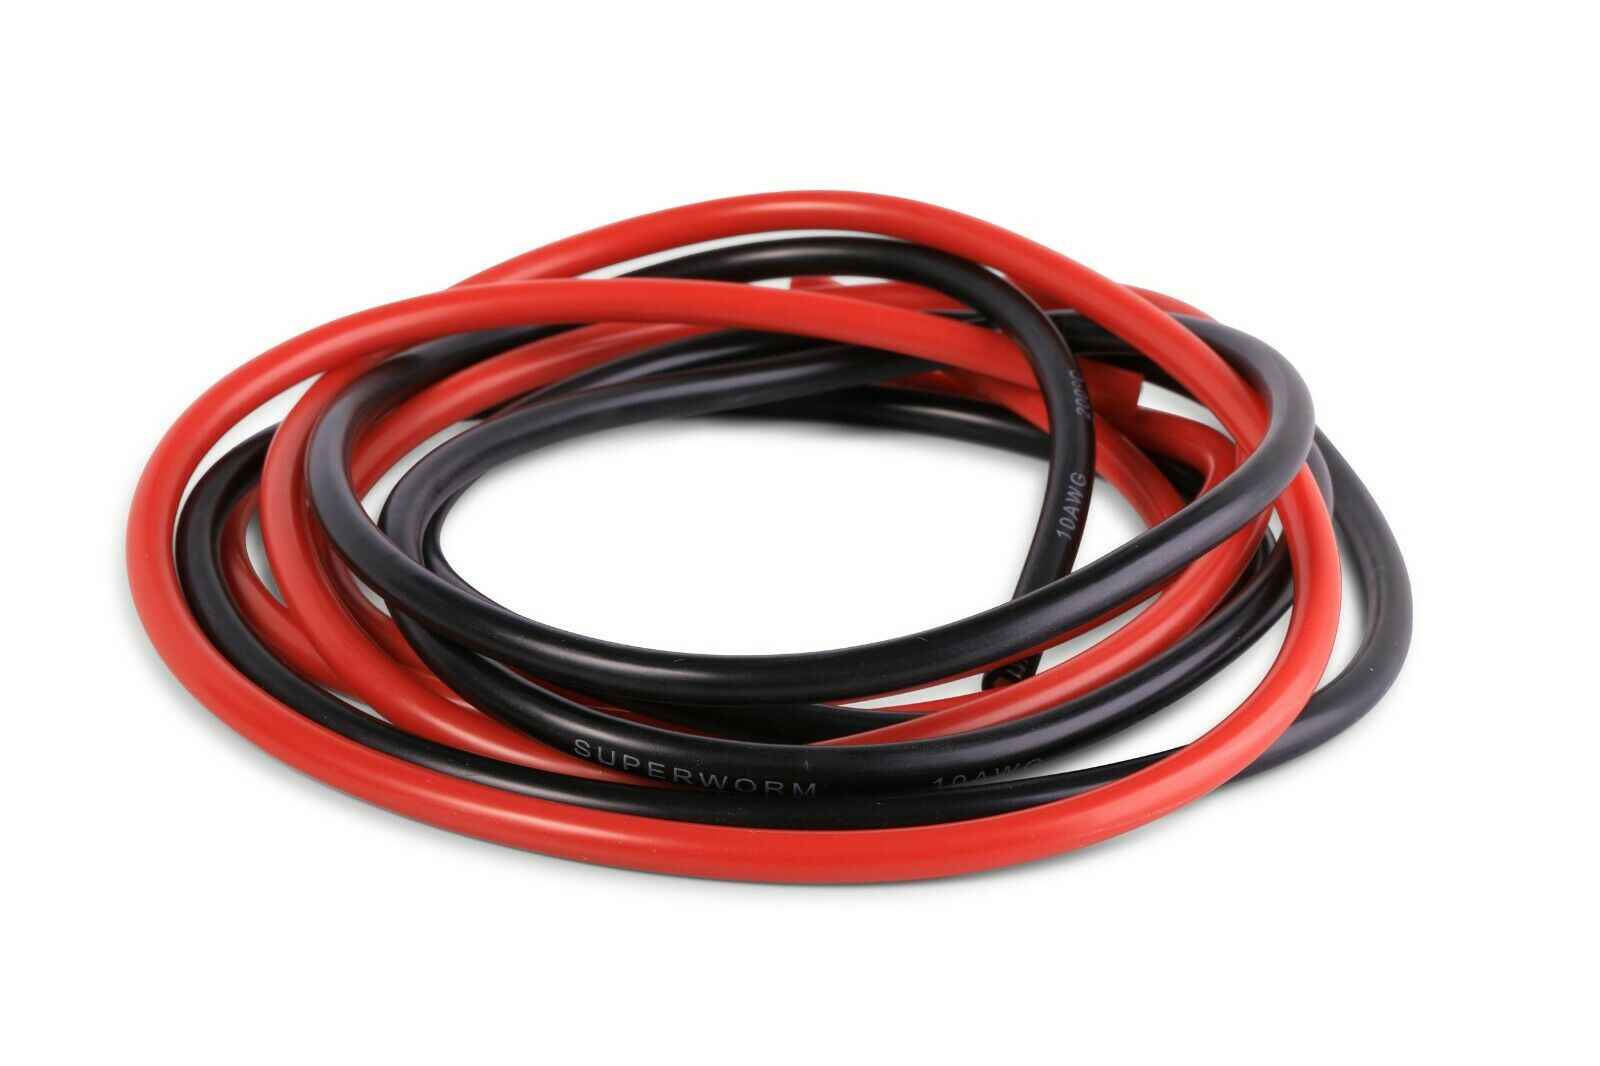 10 Gauge Silicone Wire 10 feet - 10 AWG Silicone Wire - Flexible Silicone Wire